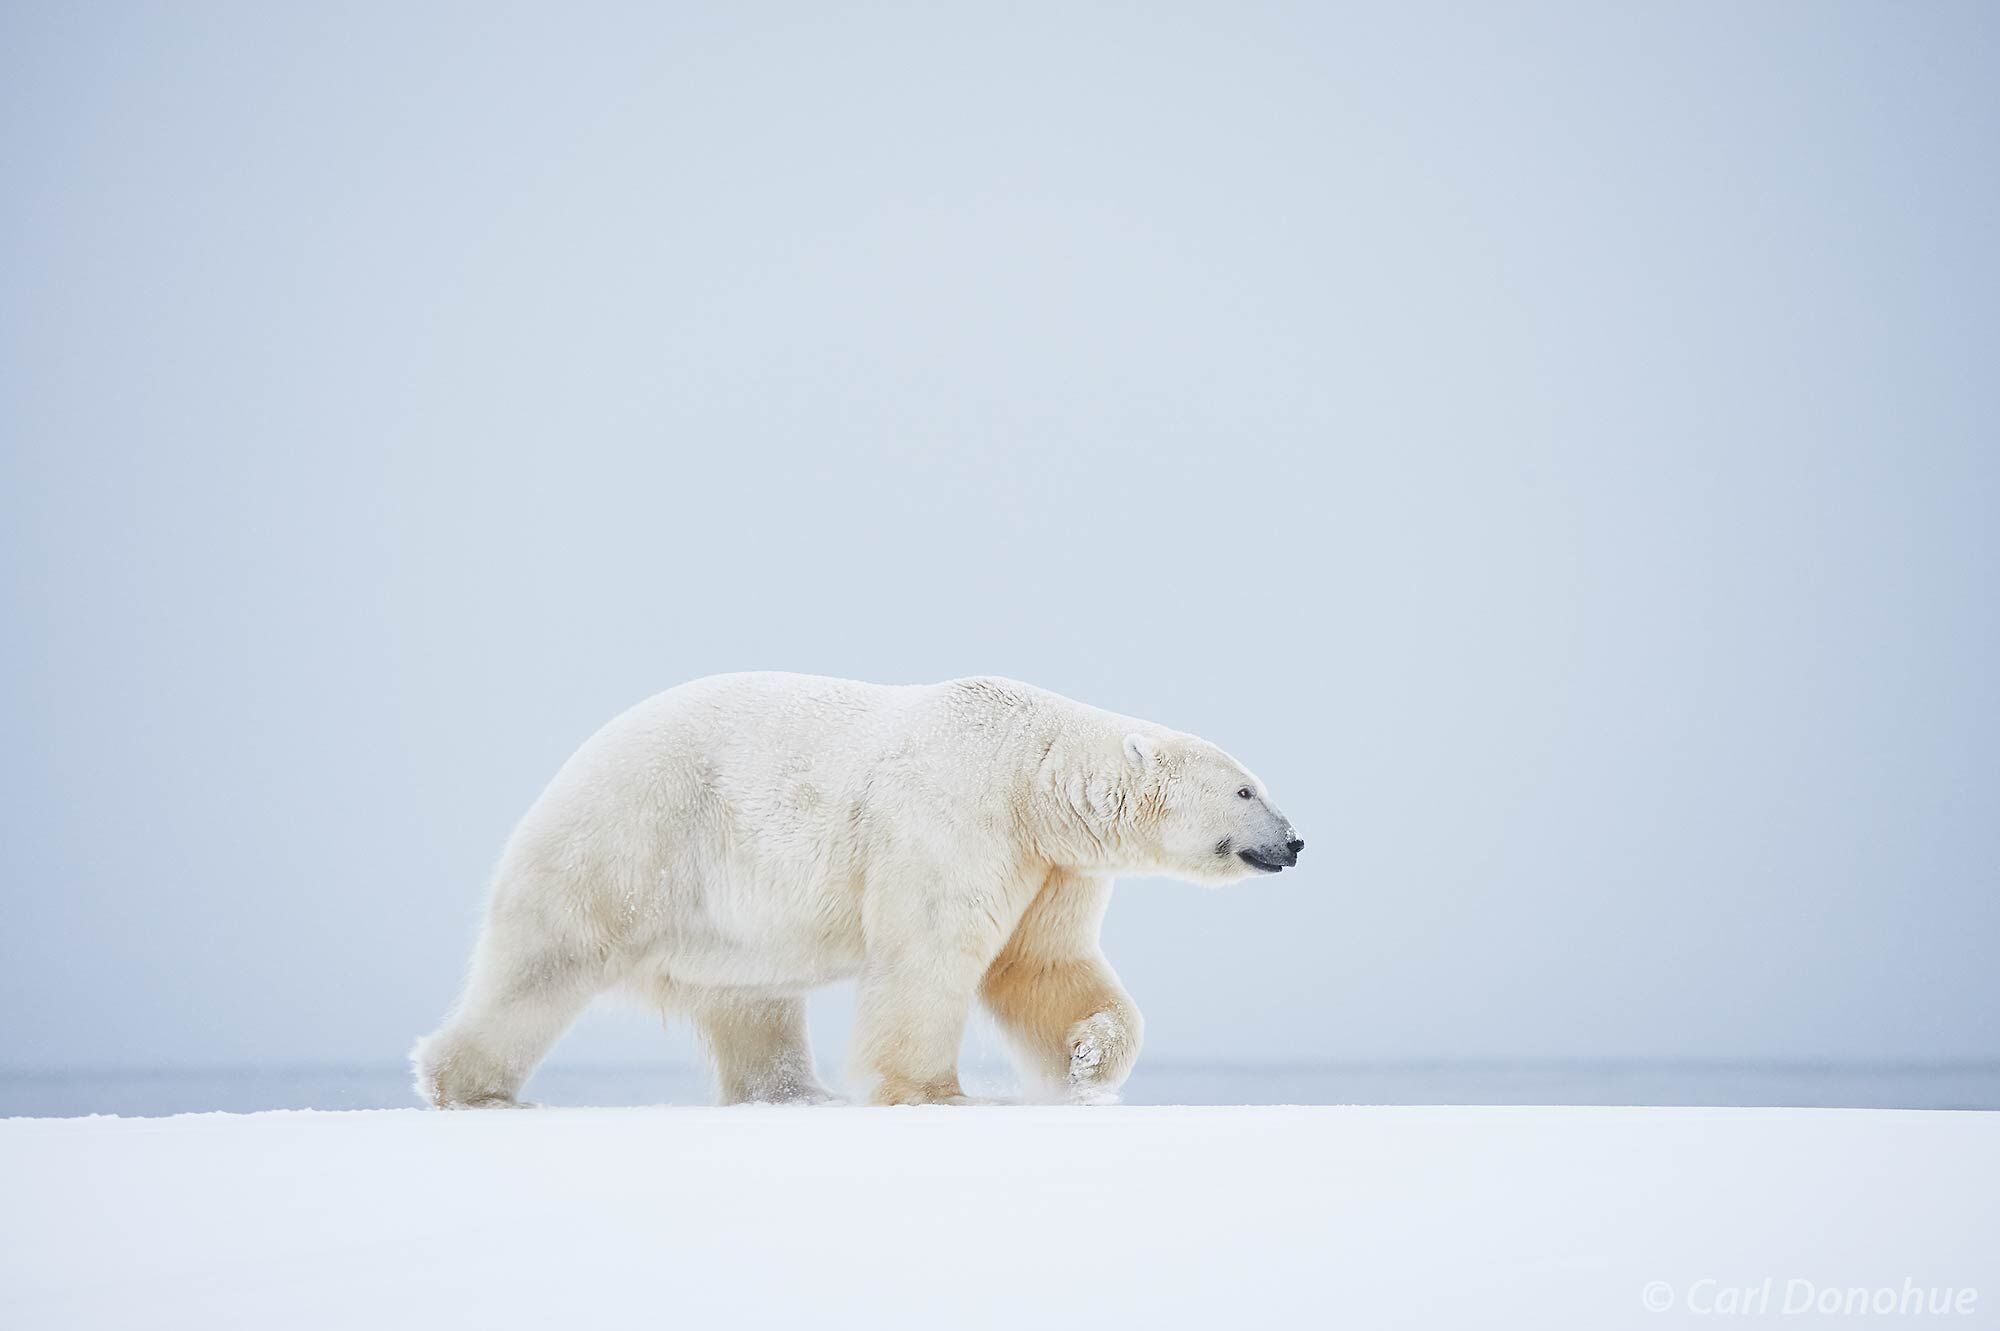 A large male adult polar bear (Ursus maritimus) walks across the frozen, snow-covered tundra along the shores of the Beaufort...